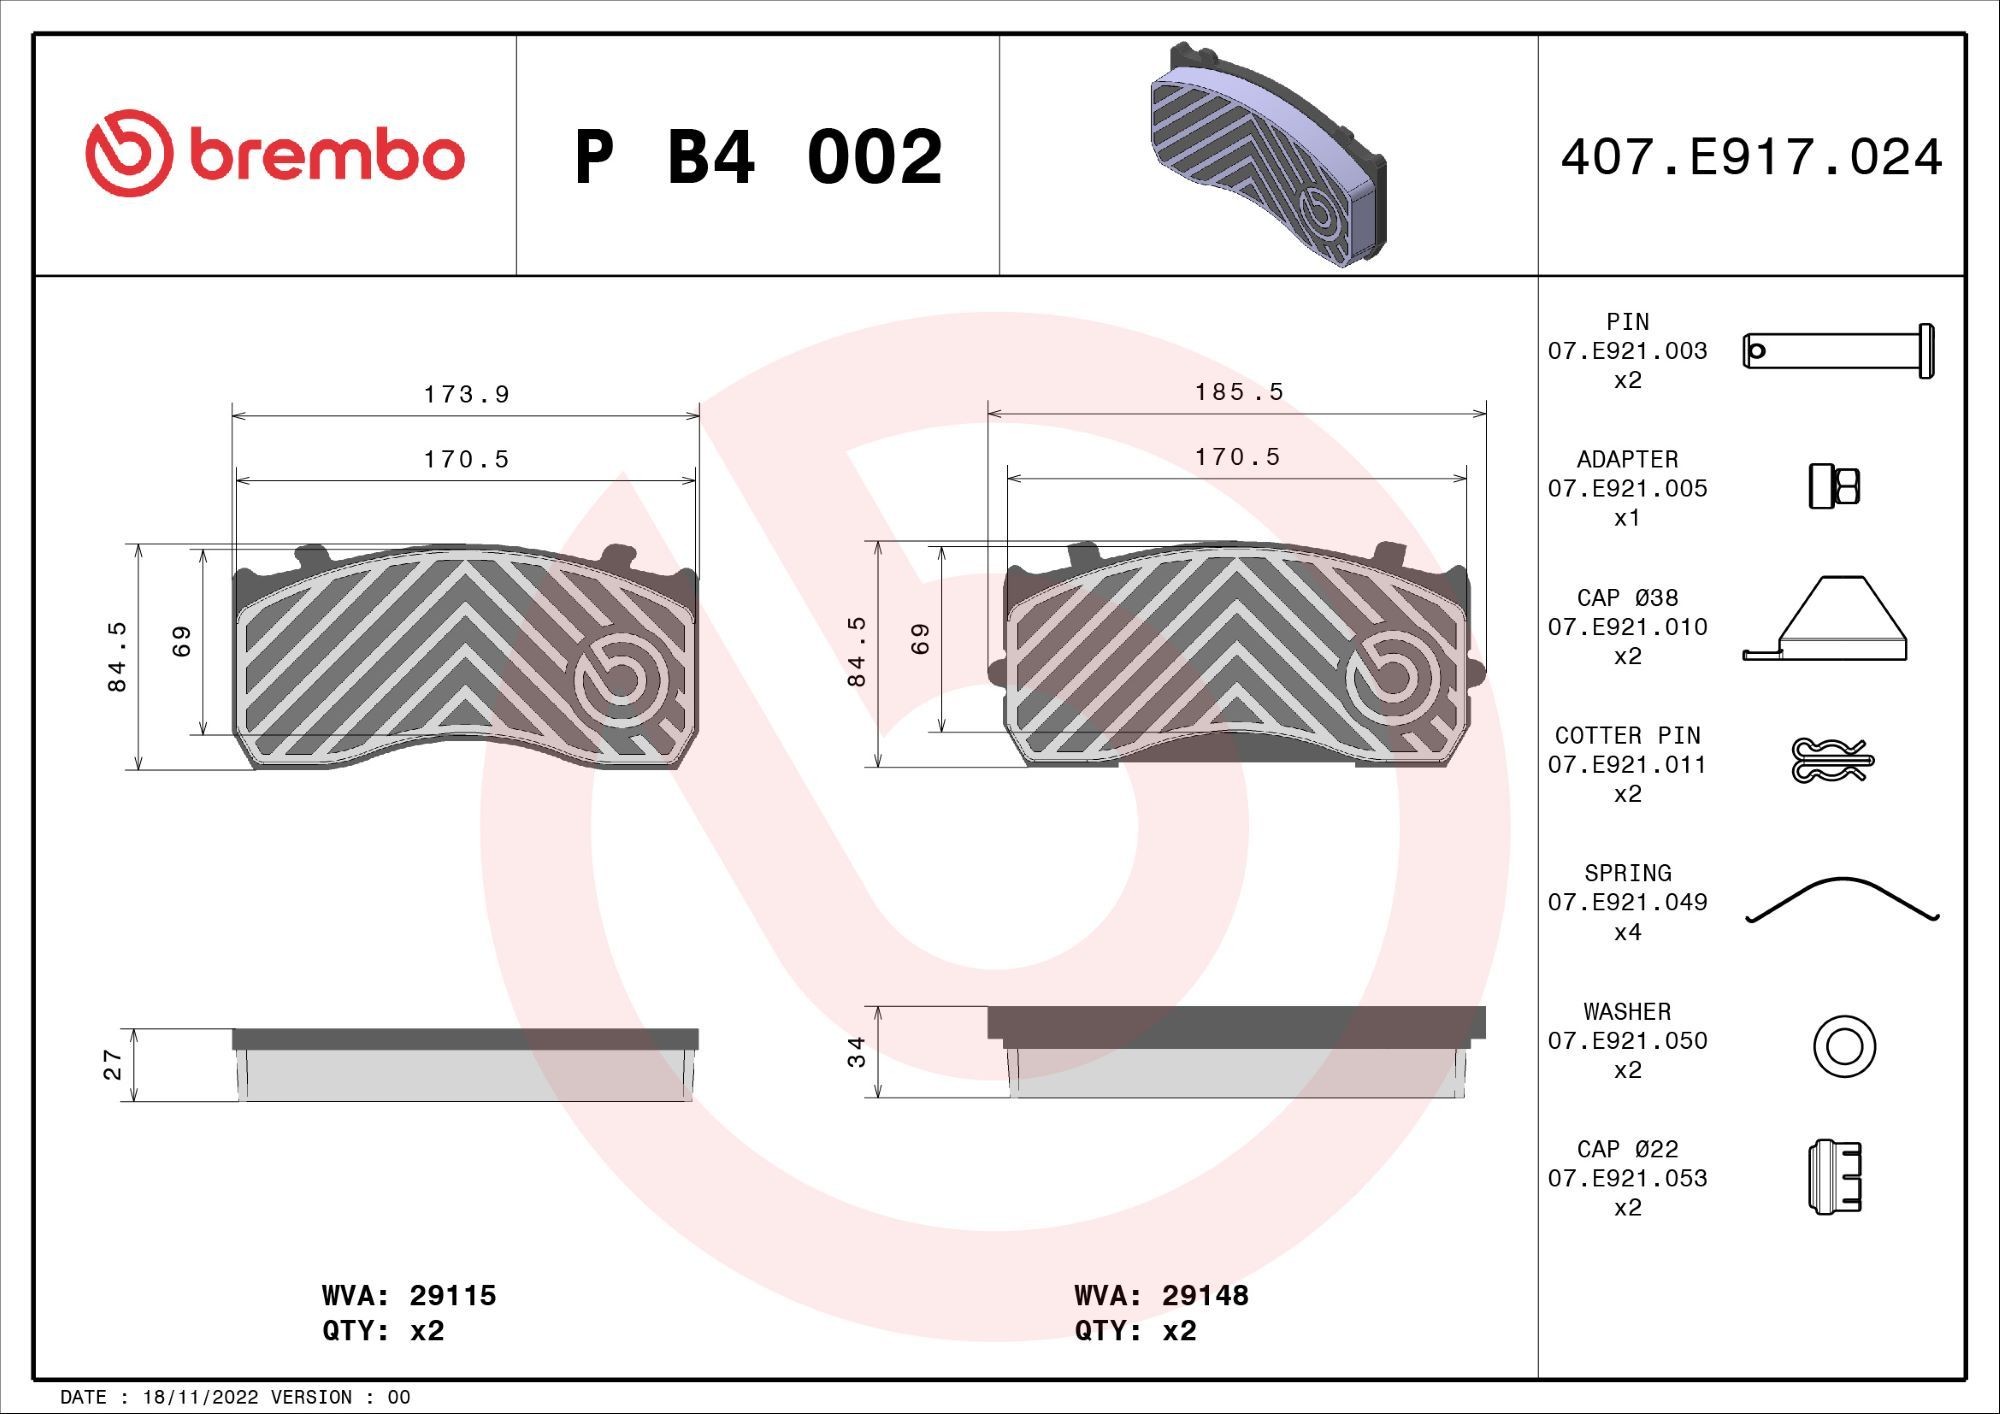 BREMBO P B4 002 Brake pad set excl. wear warning contact, with accessories